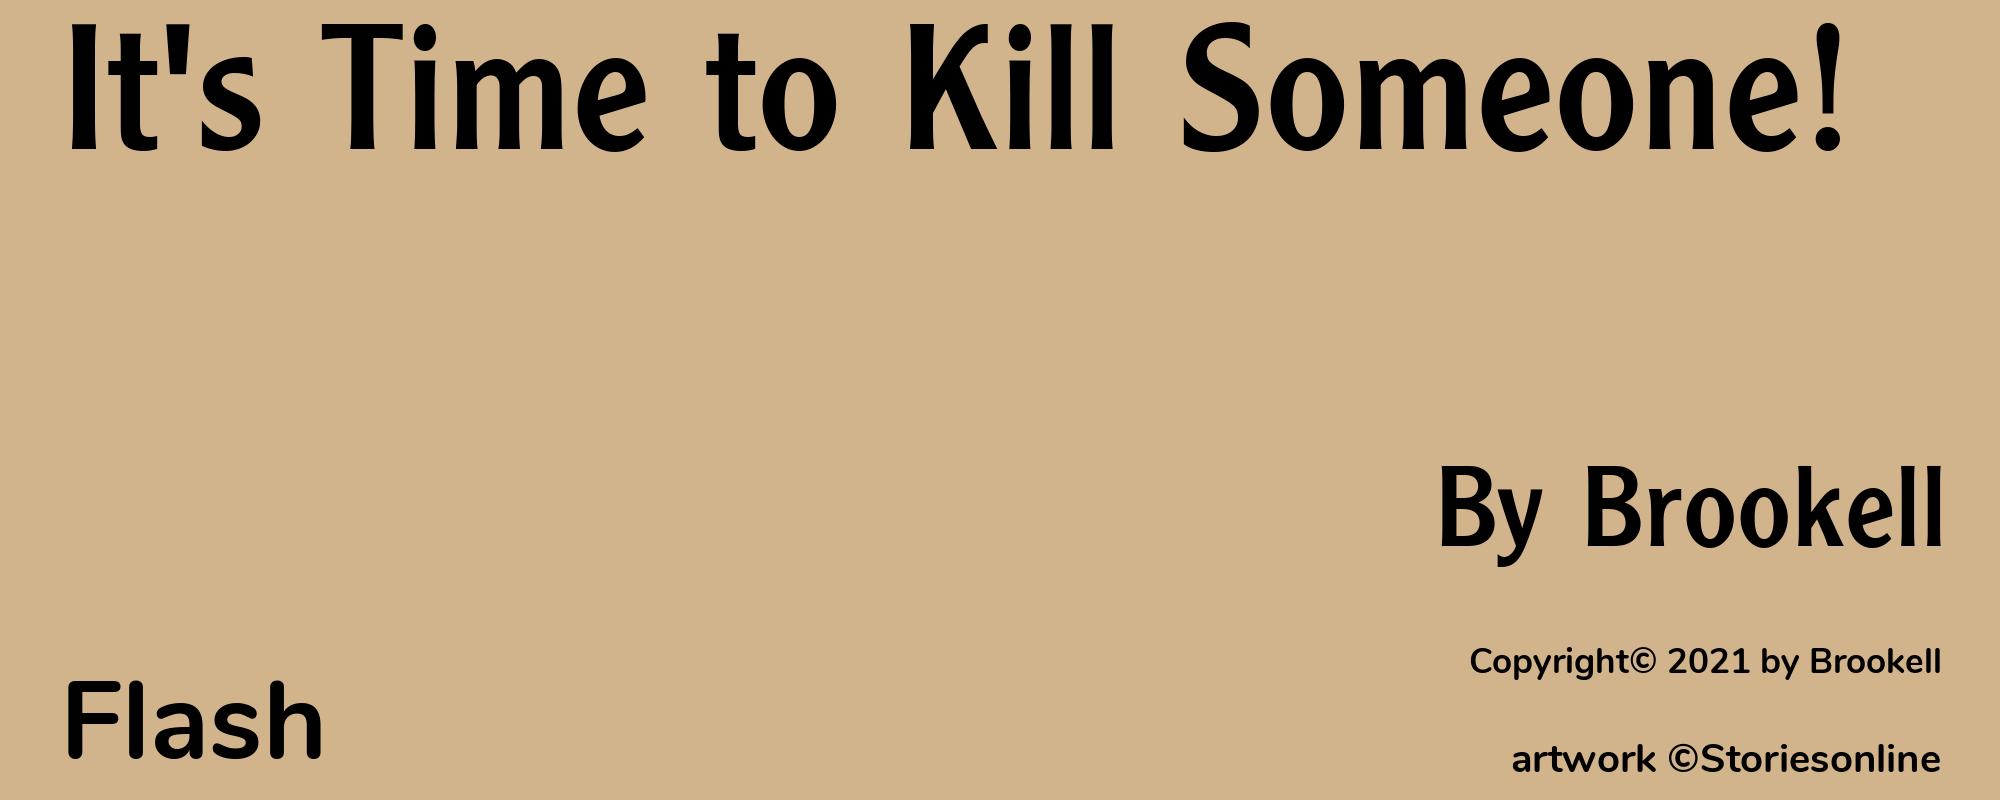 It's Time to Kill Someone! - Cover